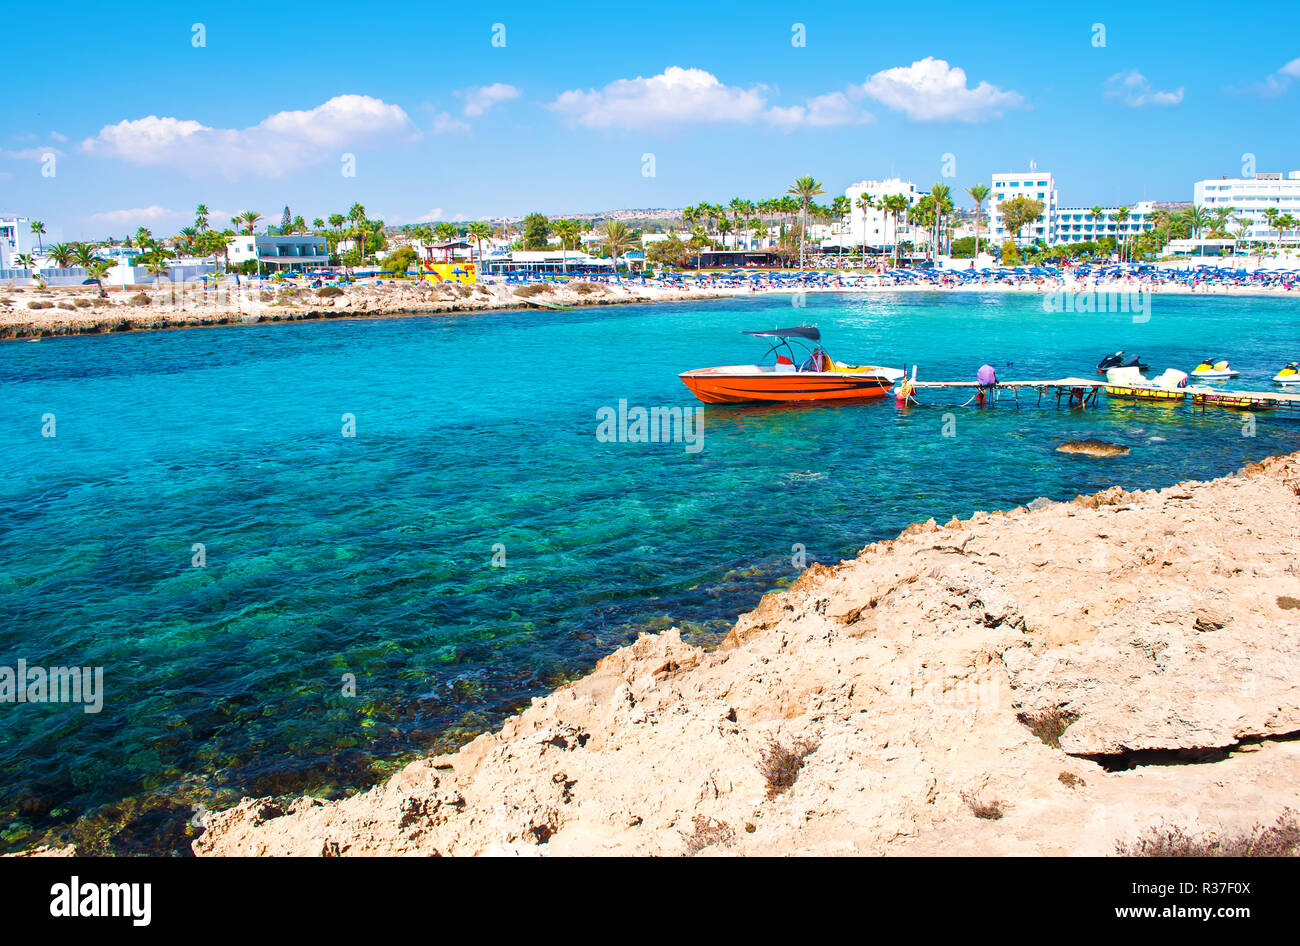 Image of one red speedboat in the bay of Vathia Gonia beach near Agia Napa, Cyprus. Rocky coast and sea with turquoise blue water in a bay, houses on  Stock Photo